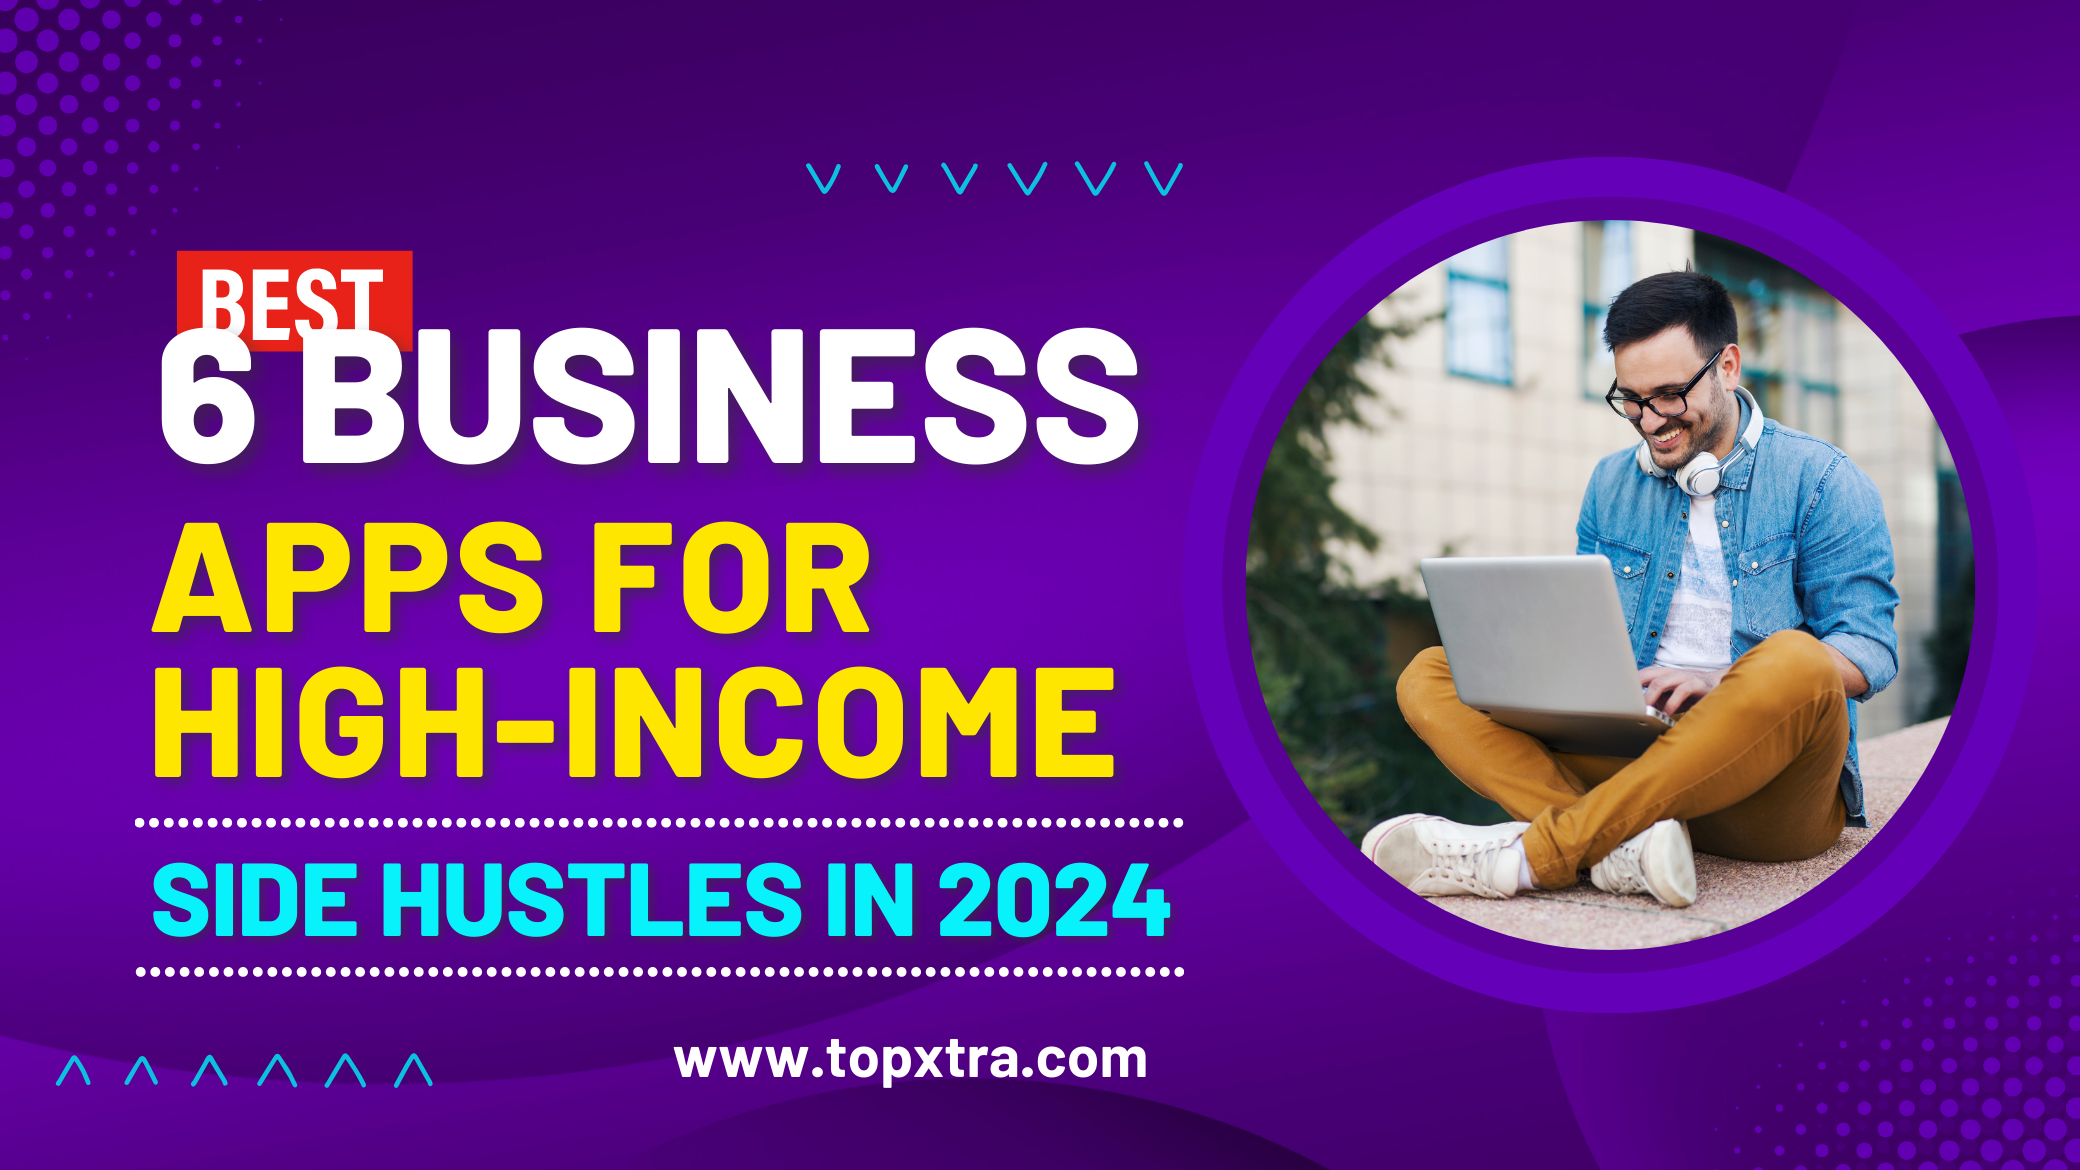 6 Best Business Apps for High-Income Side Hustles in 2024